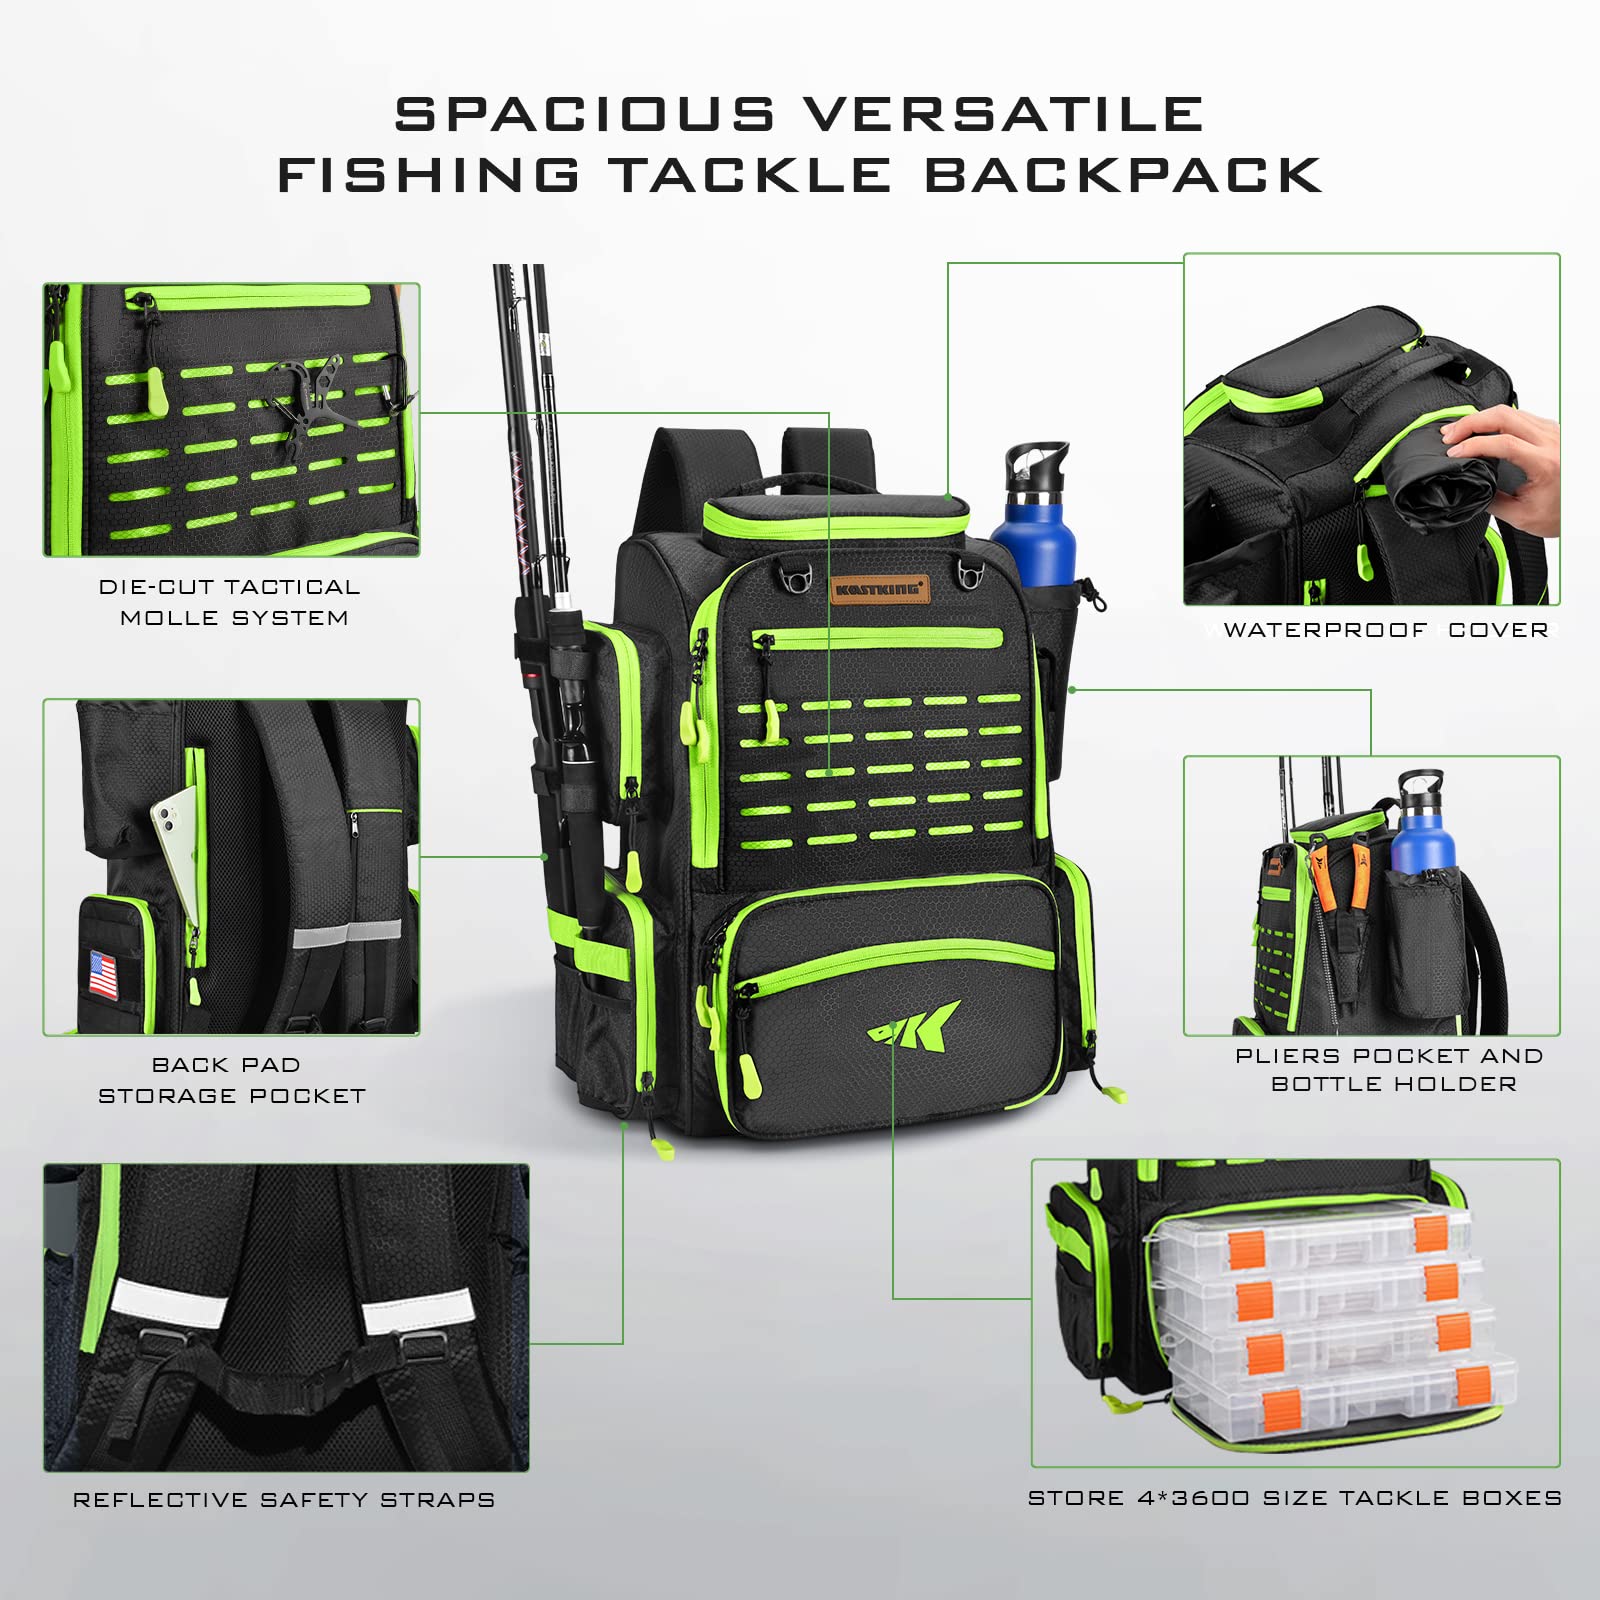 Shop for fishing tackle backpack